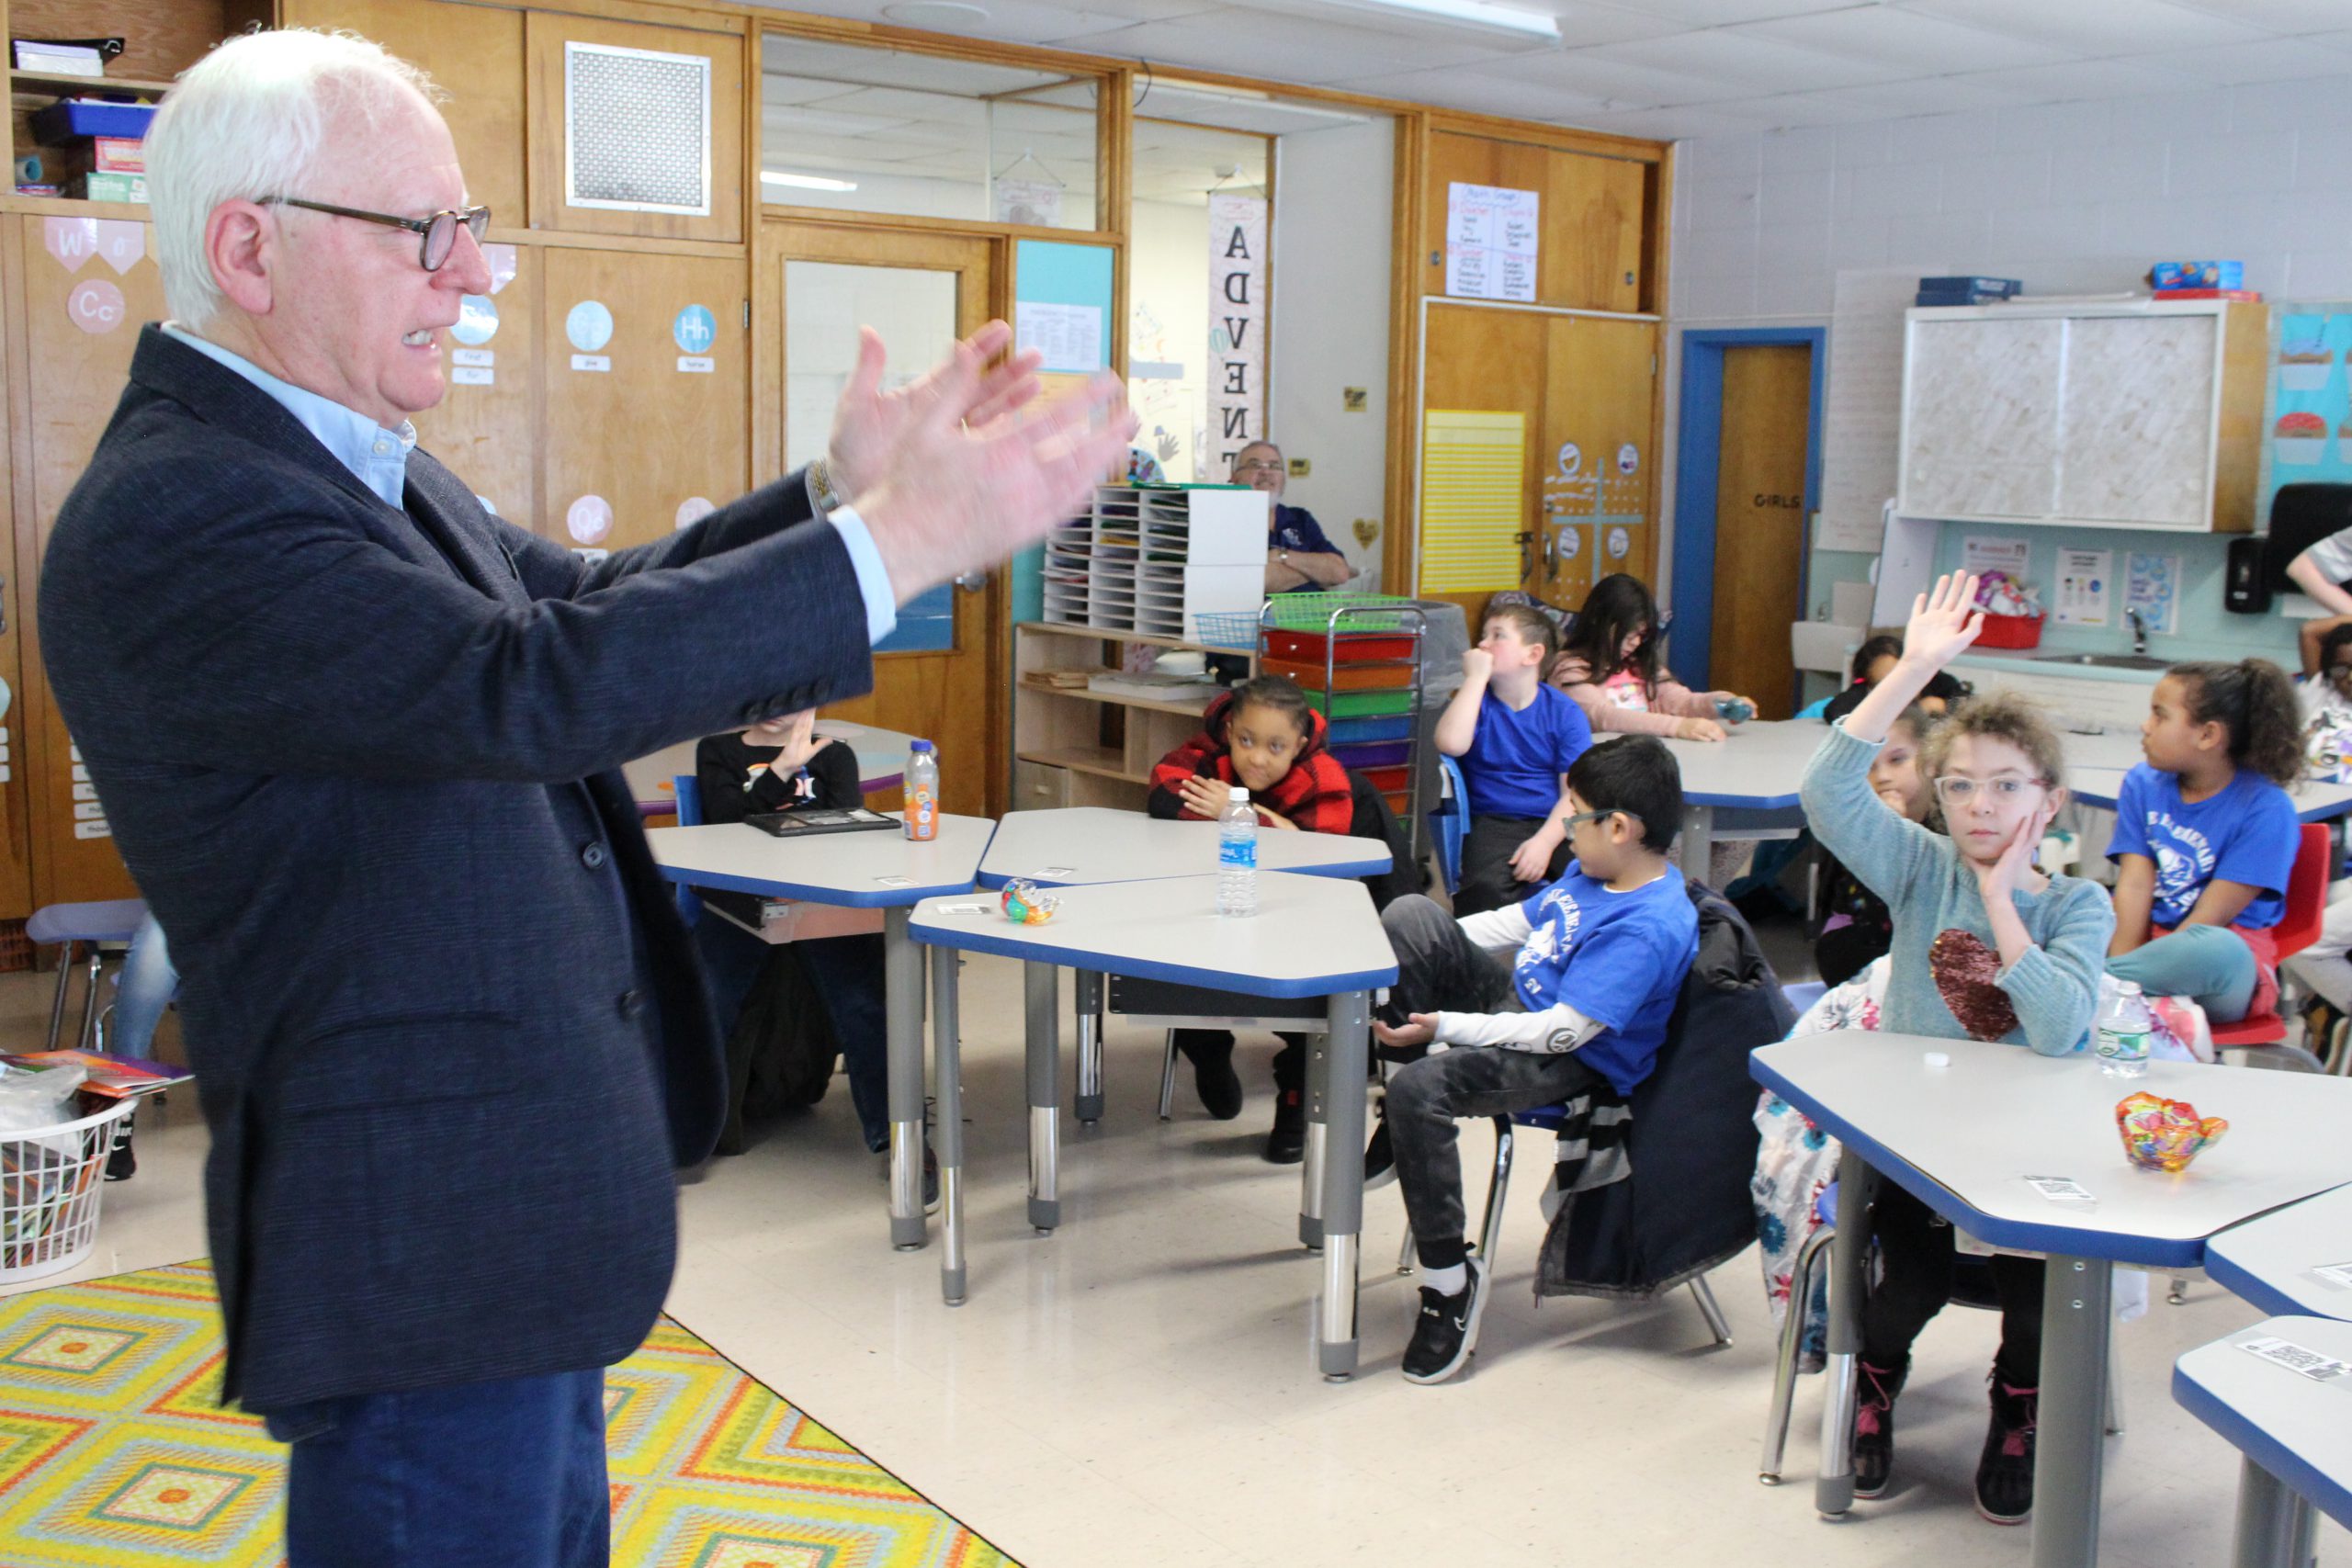 Mr. Conway is standing before a classroom of students. He has his hands out as if gesturing. The students are all seated at desks listening intently.